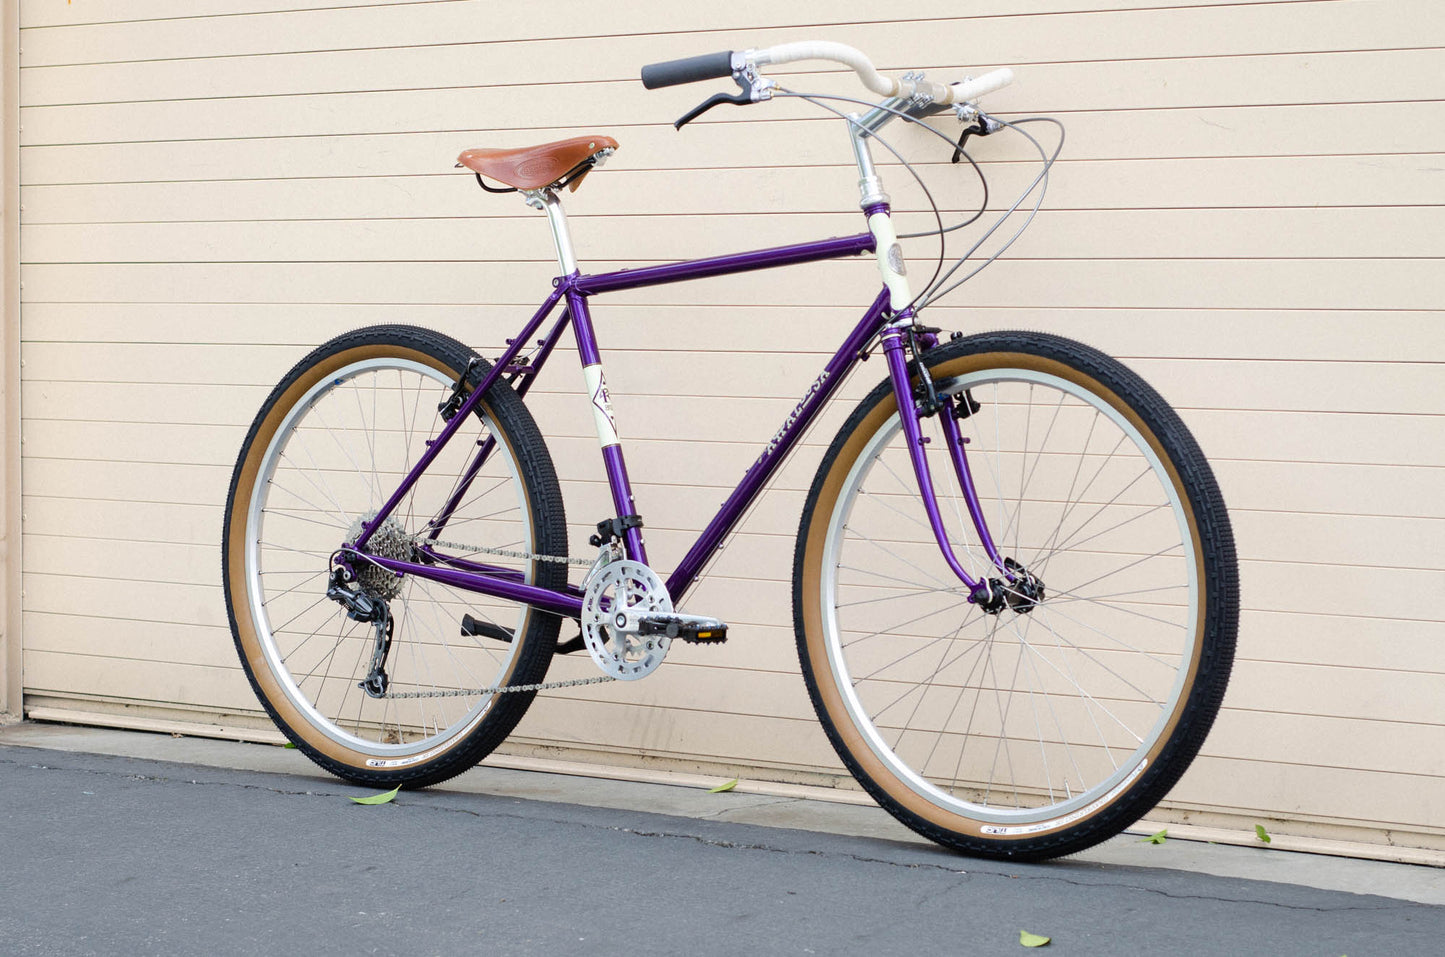 Appaloosa Build - Antonio's Pick (frame not included)